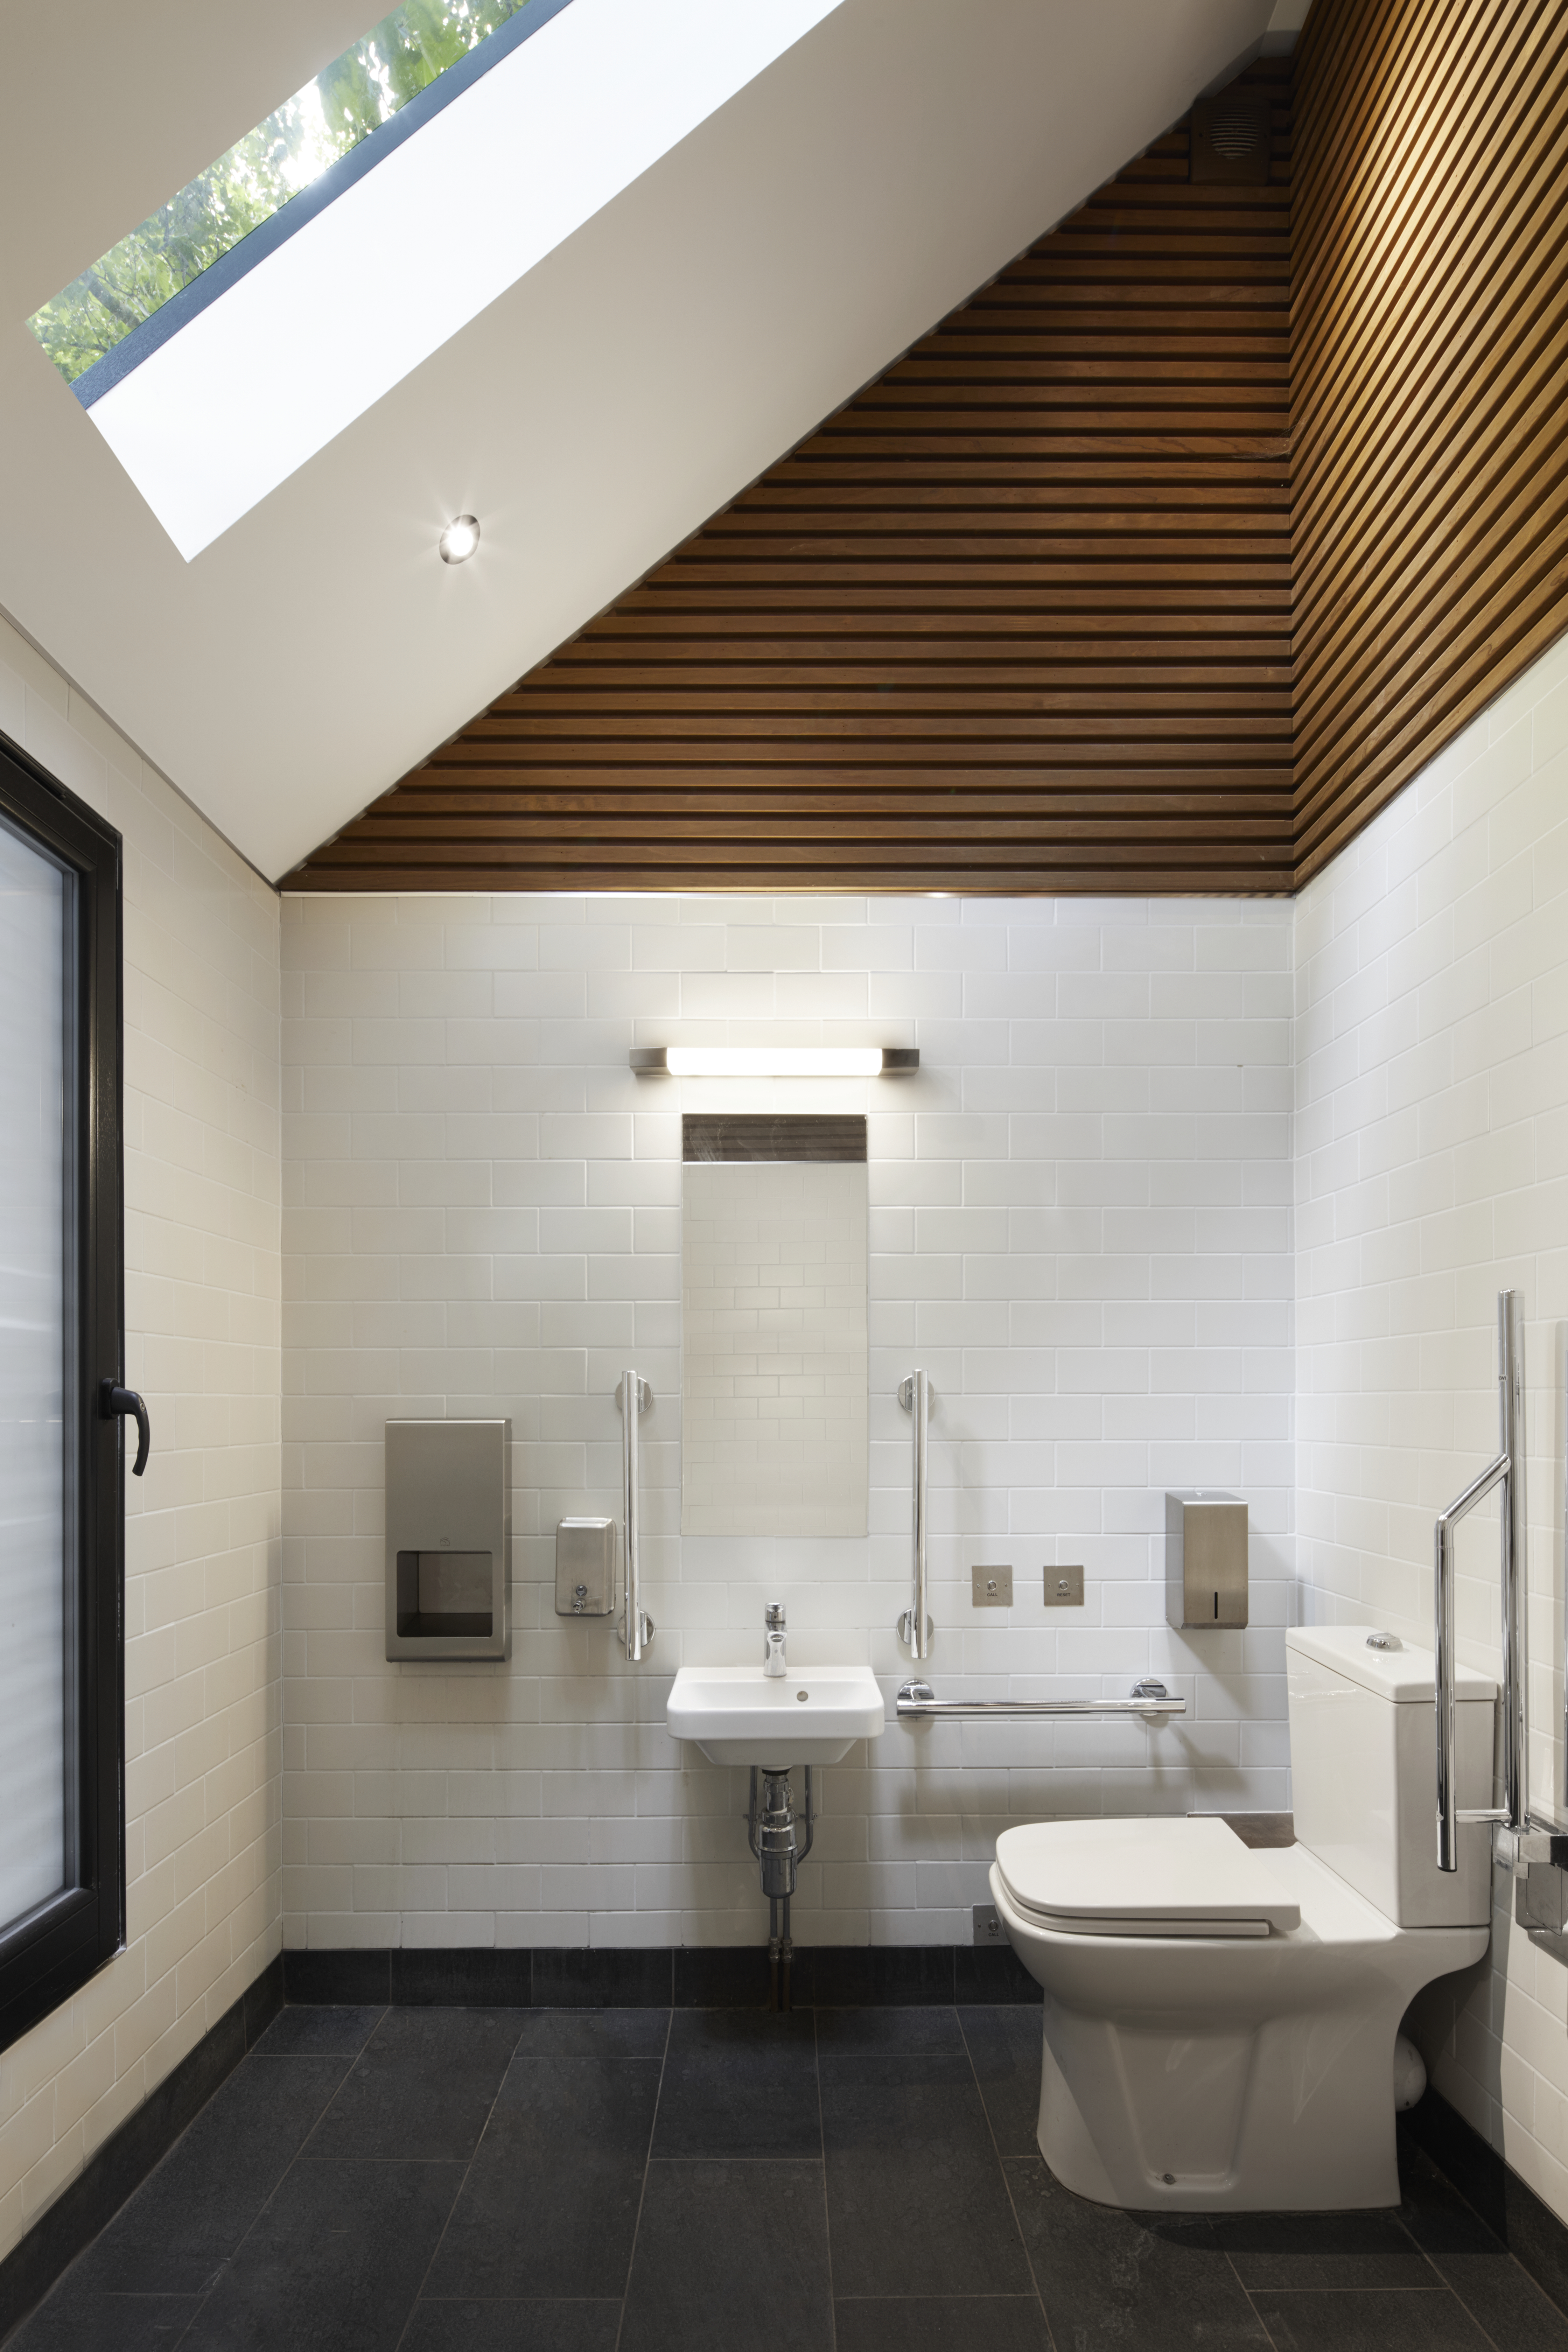 Brook Green Pavilion’s design-led Doc M compliant accessible toilet including wood panelled vaulted ceiling, chrome grab rails, raised height toilet with easy-to-use flush, and call alarm button. 